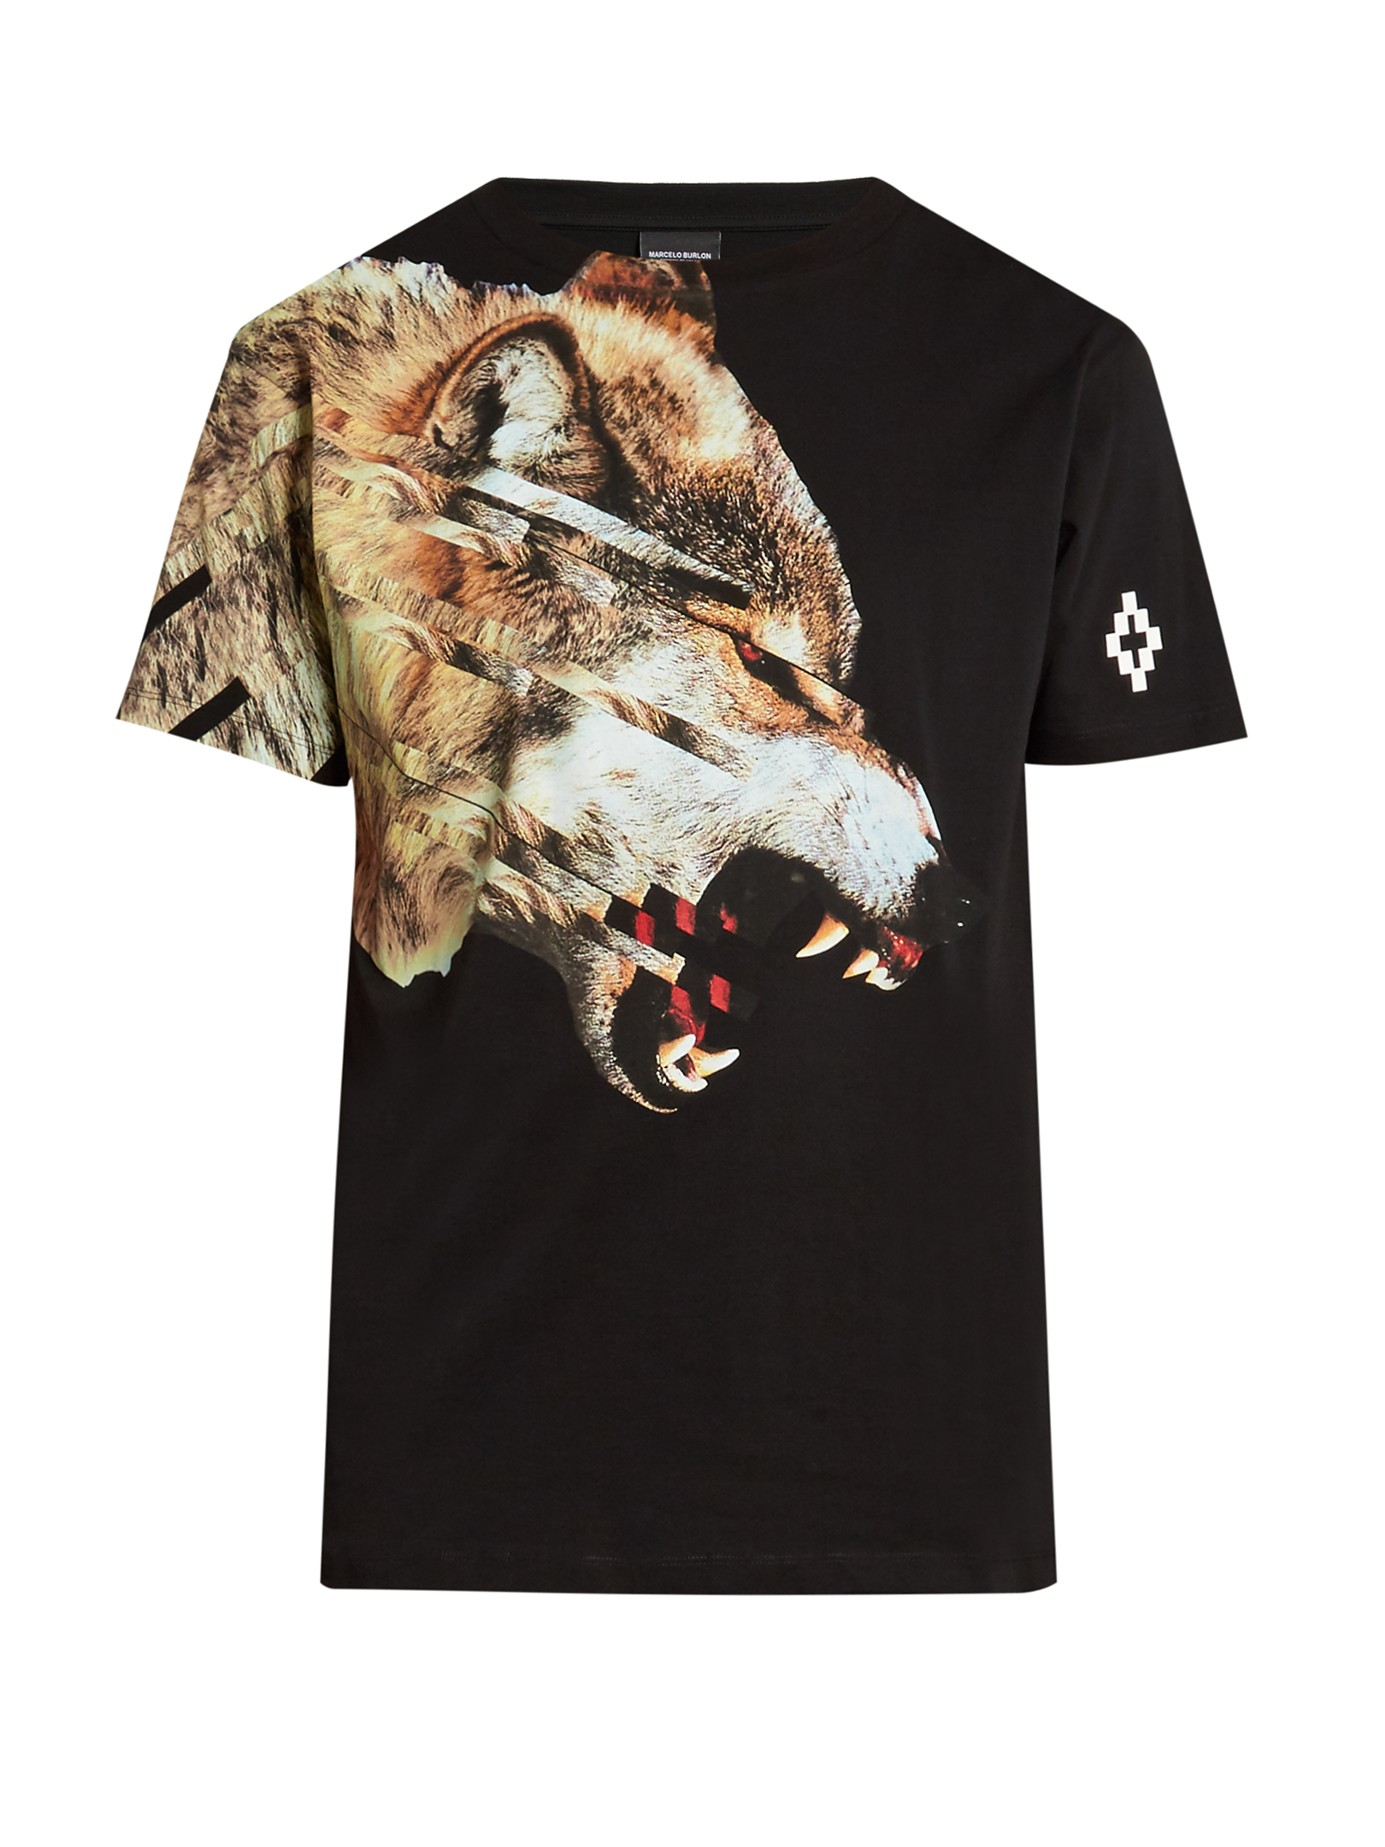 Marcelo Cotton Cruces Wolf-print T-shirt in Black for Men - Lyst